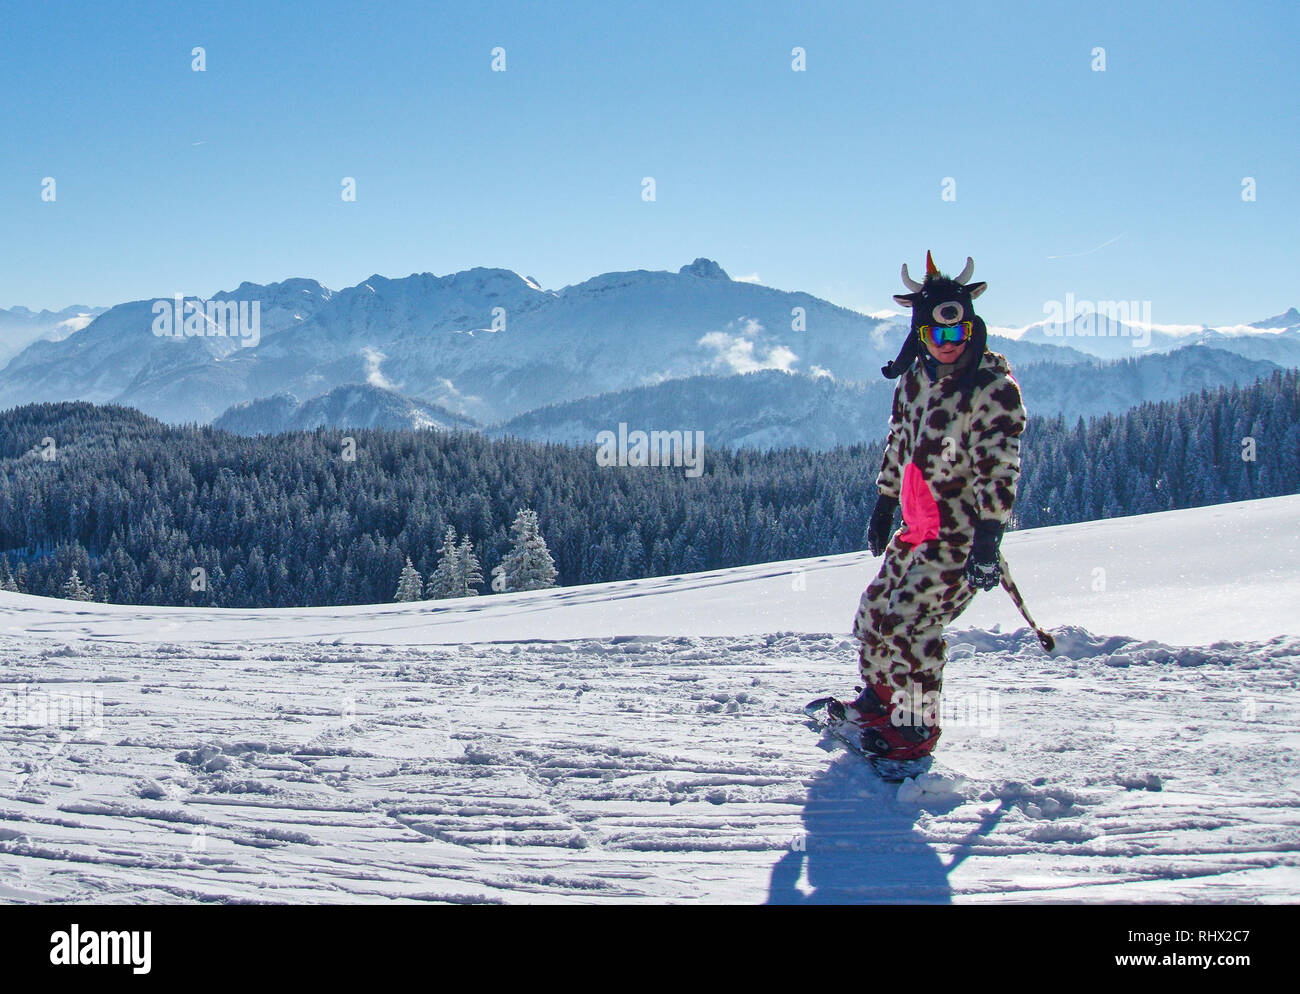 Nesselwang, Bavaria, Germany. 4th Feb 2019. A snowboarder with a cow ski  outfit at the ski arena Alpspitzbahn cable car at the mountain Alpspitz in  Nesselwang, Allgäu, Bavaria, Germany, February 04, 2019.